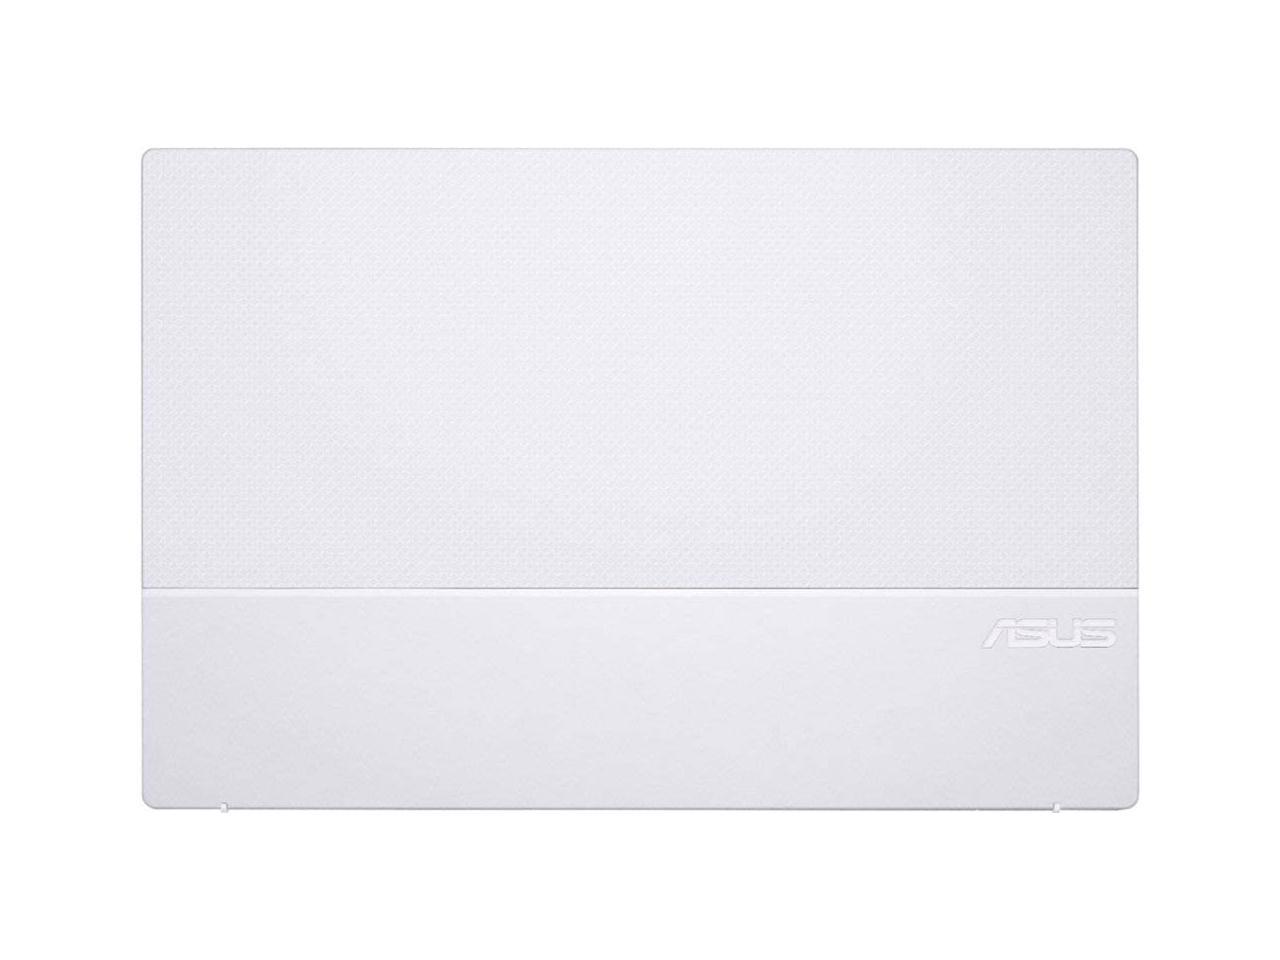 2020 ASUS ImagineBook MJ401TA Laptop Computer| Intel Core m3-8100Y up to 3.4GHz| 4GB Memory, 128GB SSD| 14" FHD, Intel UHD Graphics 615| 802.11AC WiFi, USB Type-C, HDMI, Textured White| Windows 10